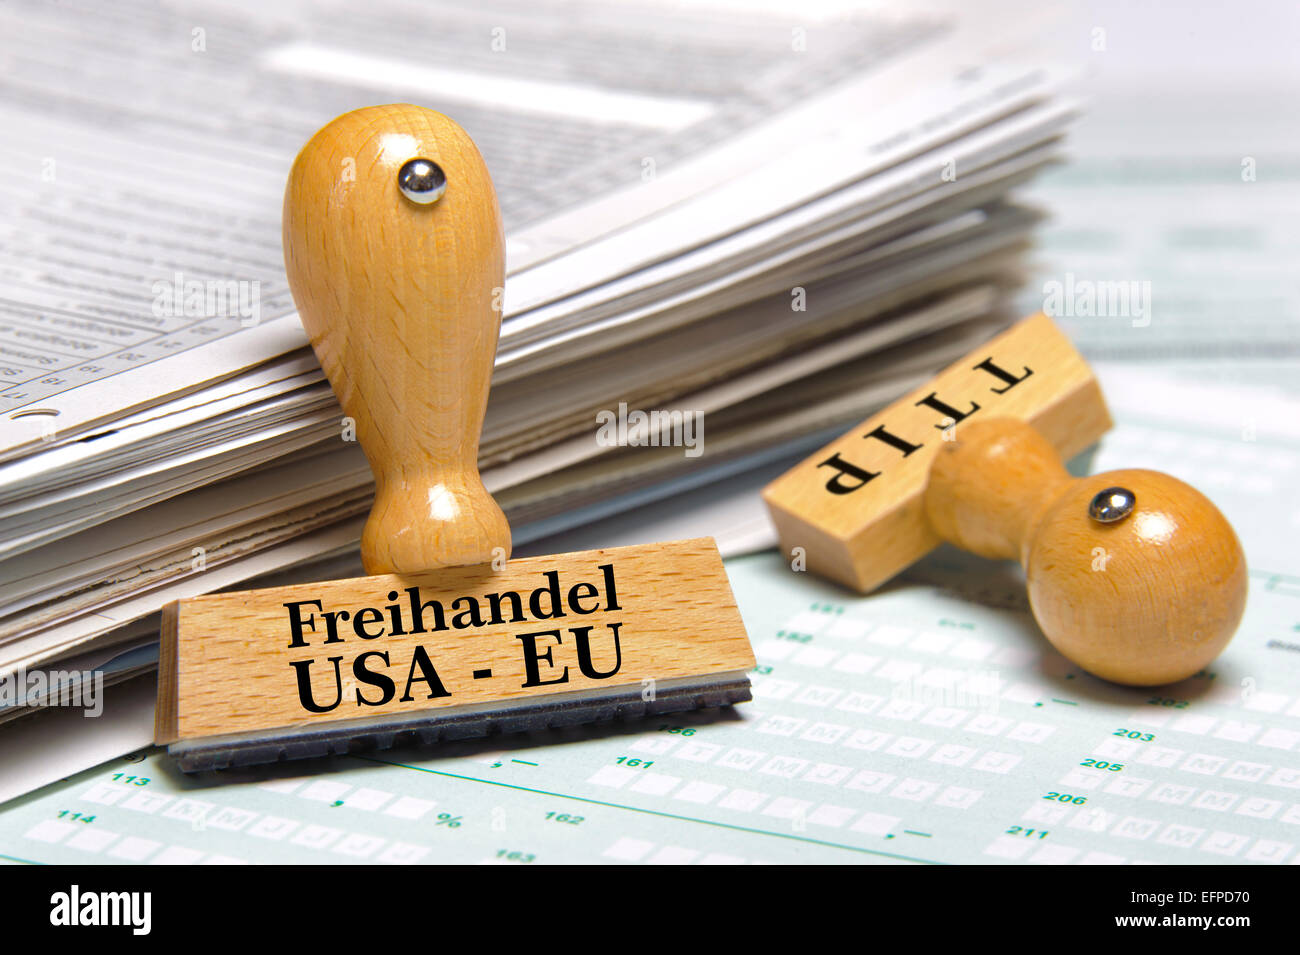 TTIP free trade agreement between USA and Europe Stock Photo